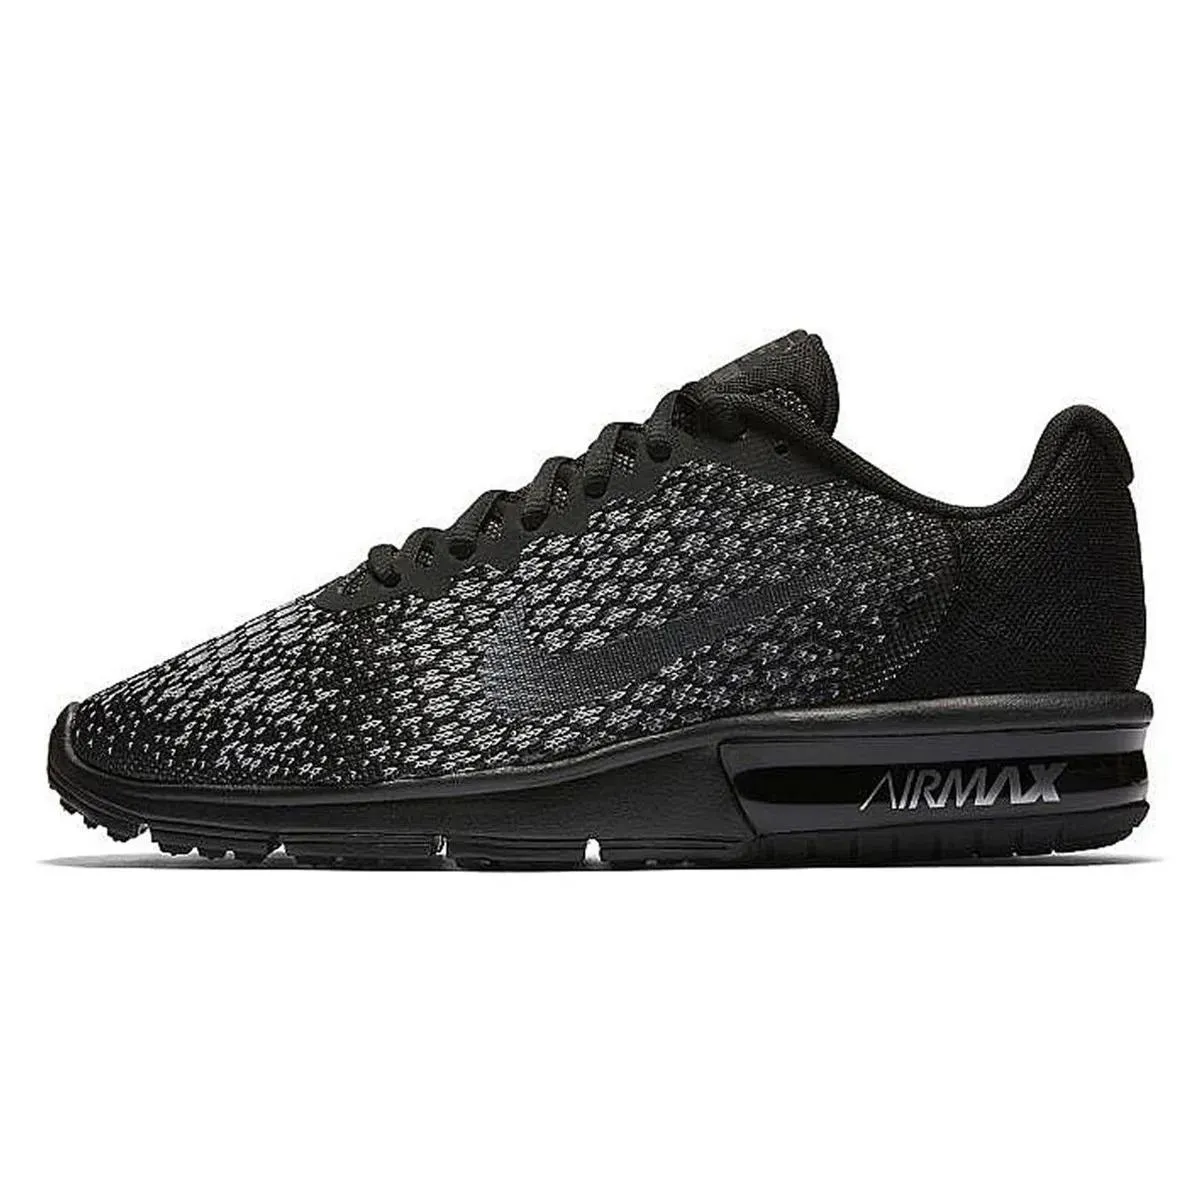 Nike Tenisice WMNS NIKE AIR MAX SEQUENT 2 